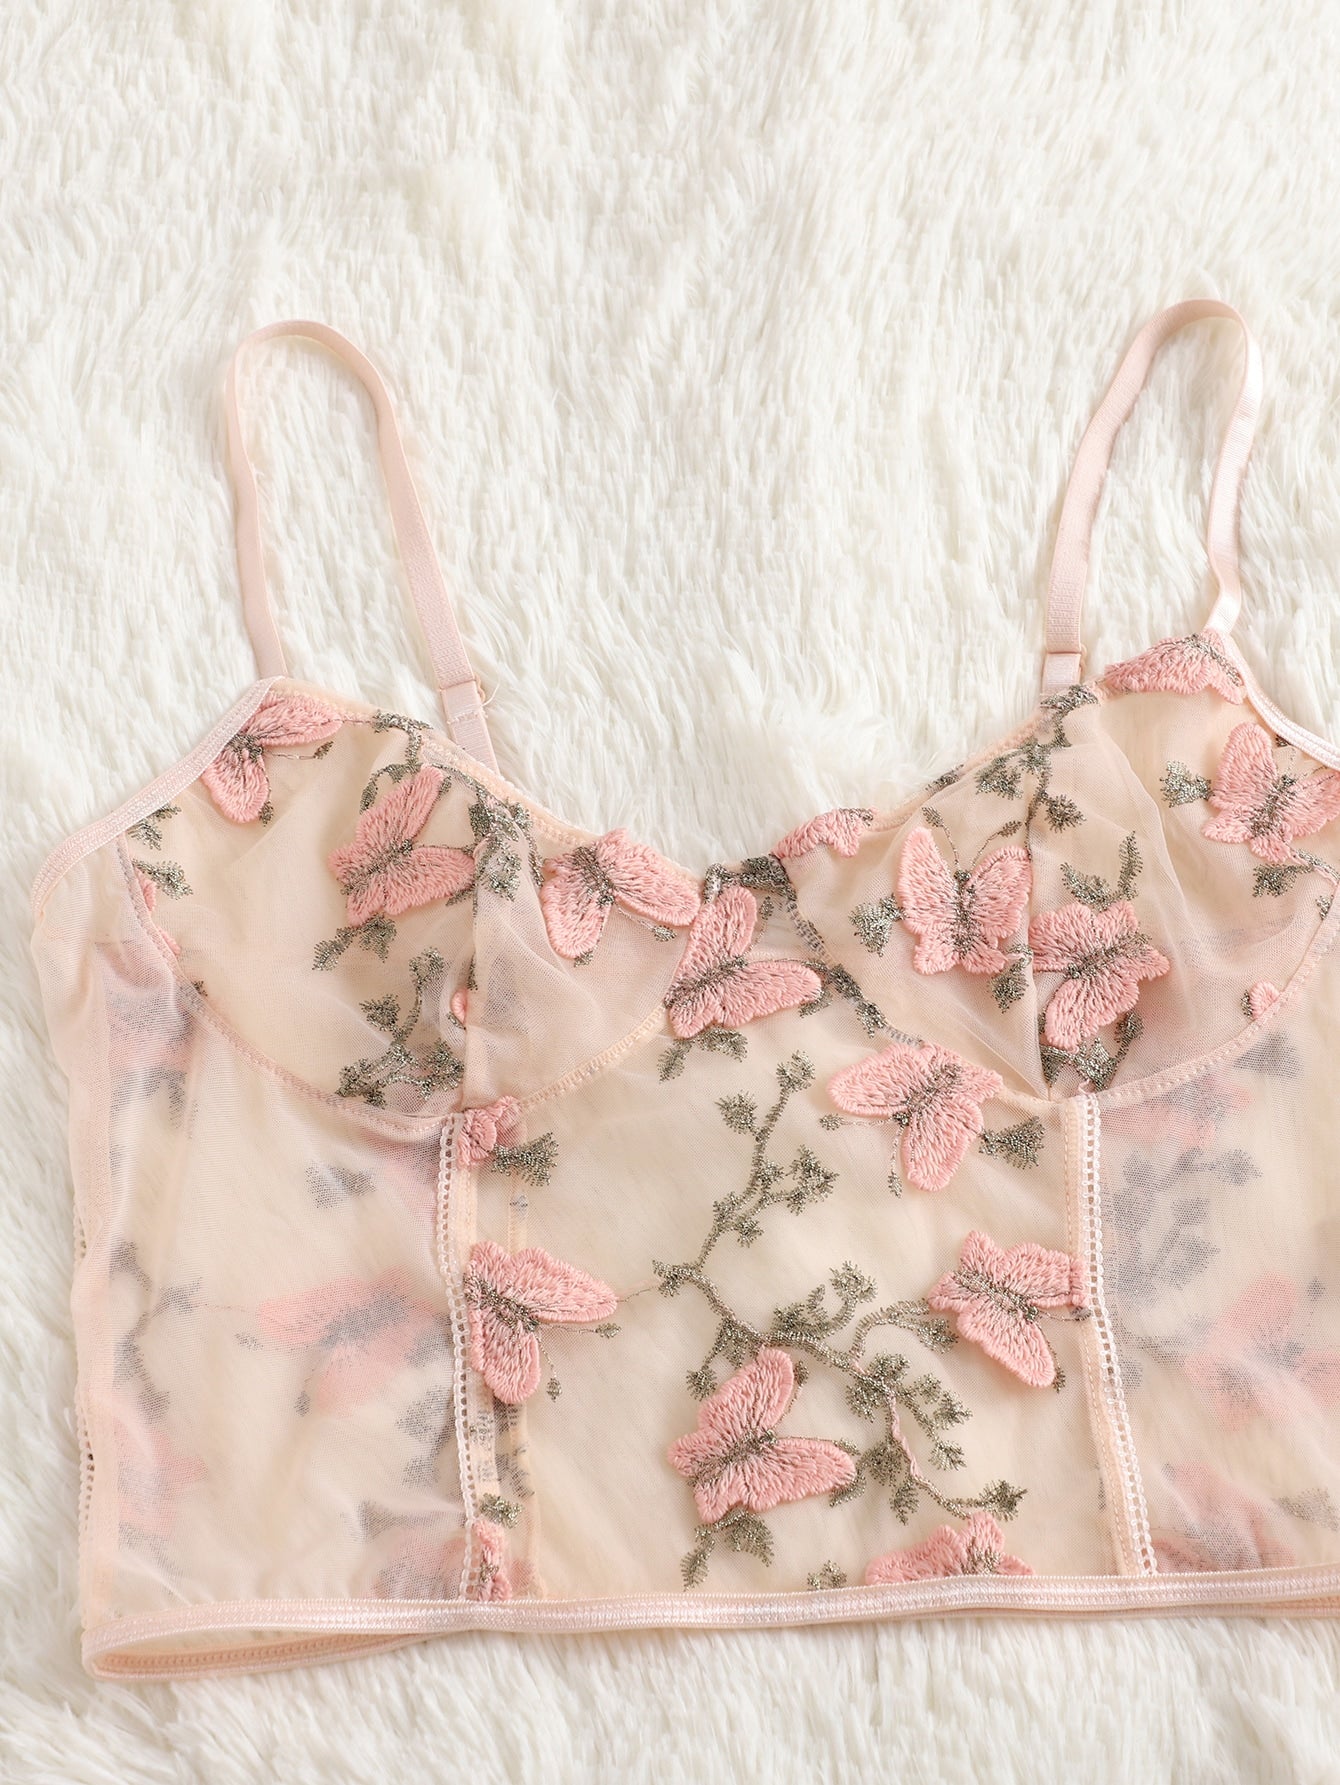 Spread Your Wings Plus Butterfly Embroidery Sheer Mesh Lingerie Set